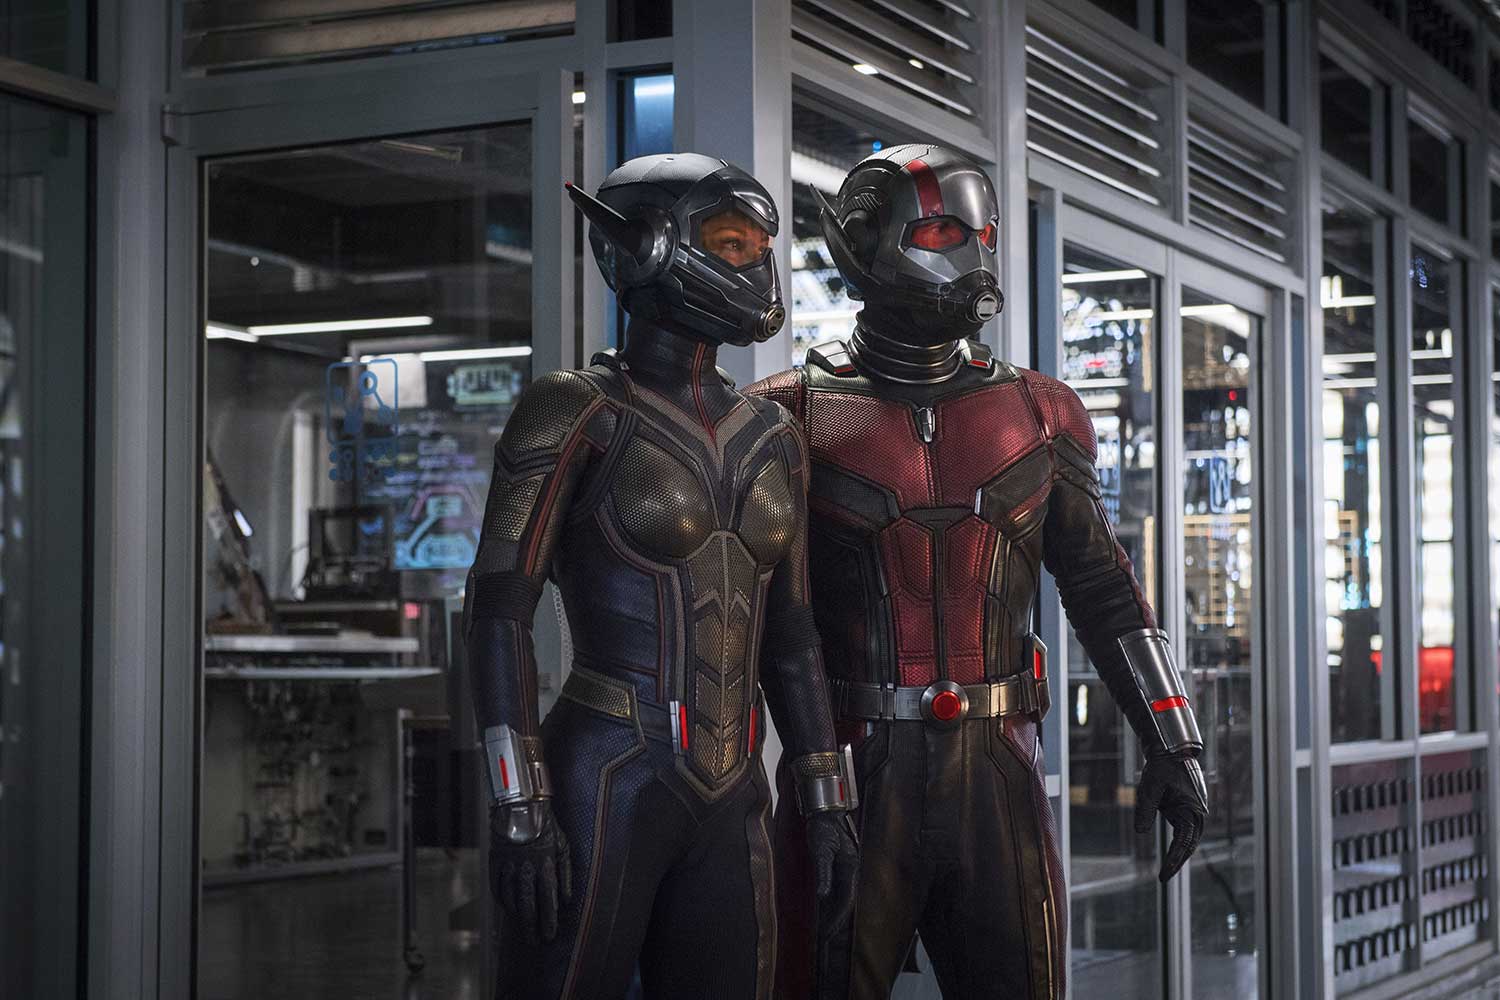 Weekend Box Office Results: Ant-Man and the Wasp Sizes Up $76M